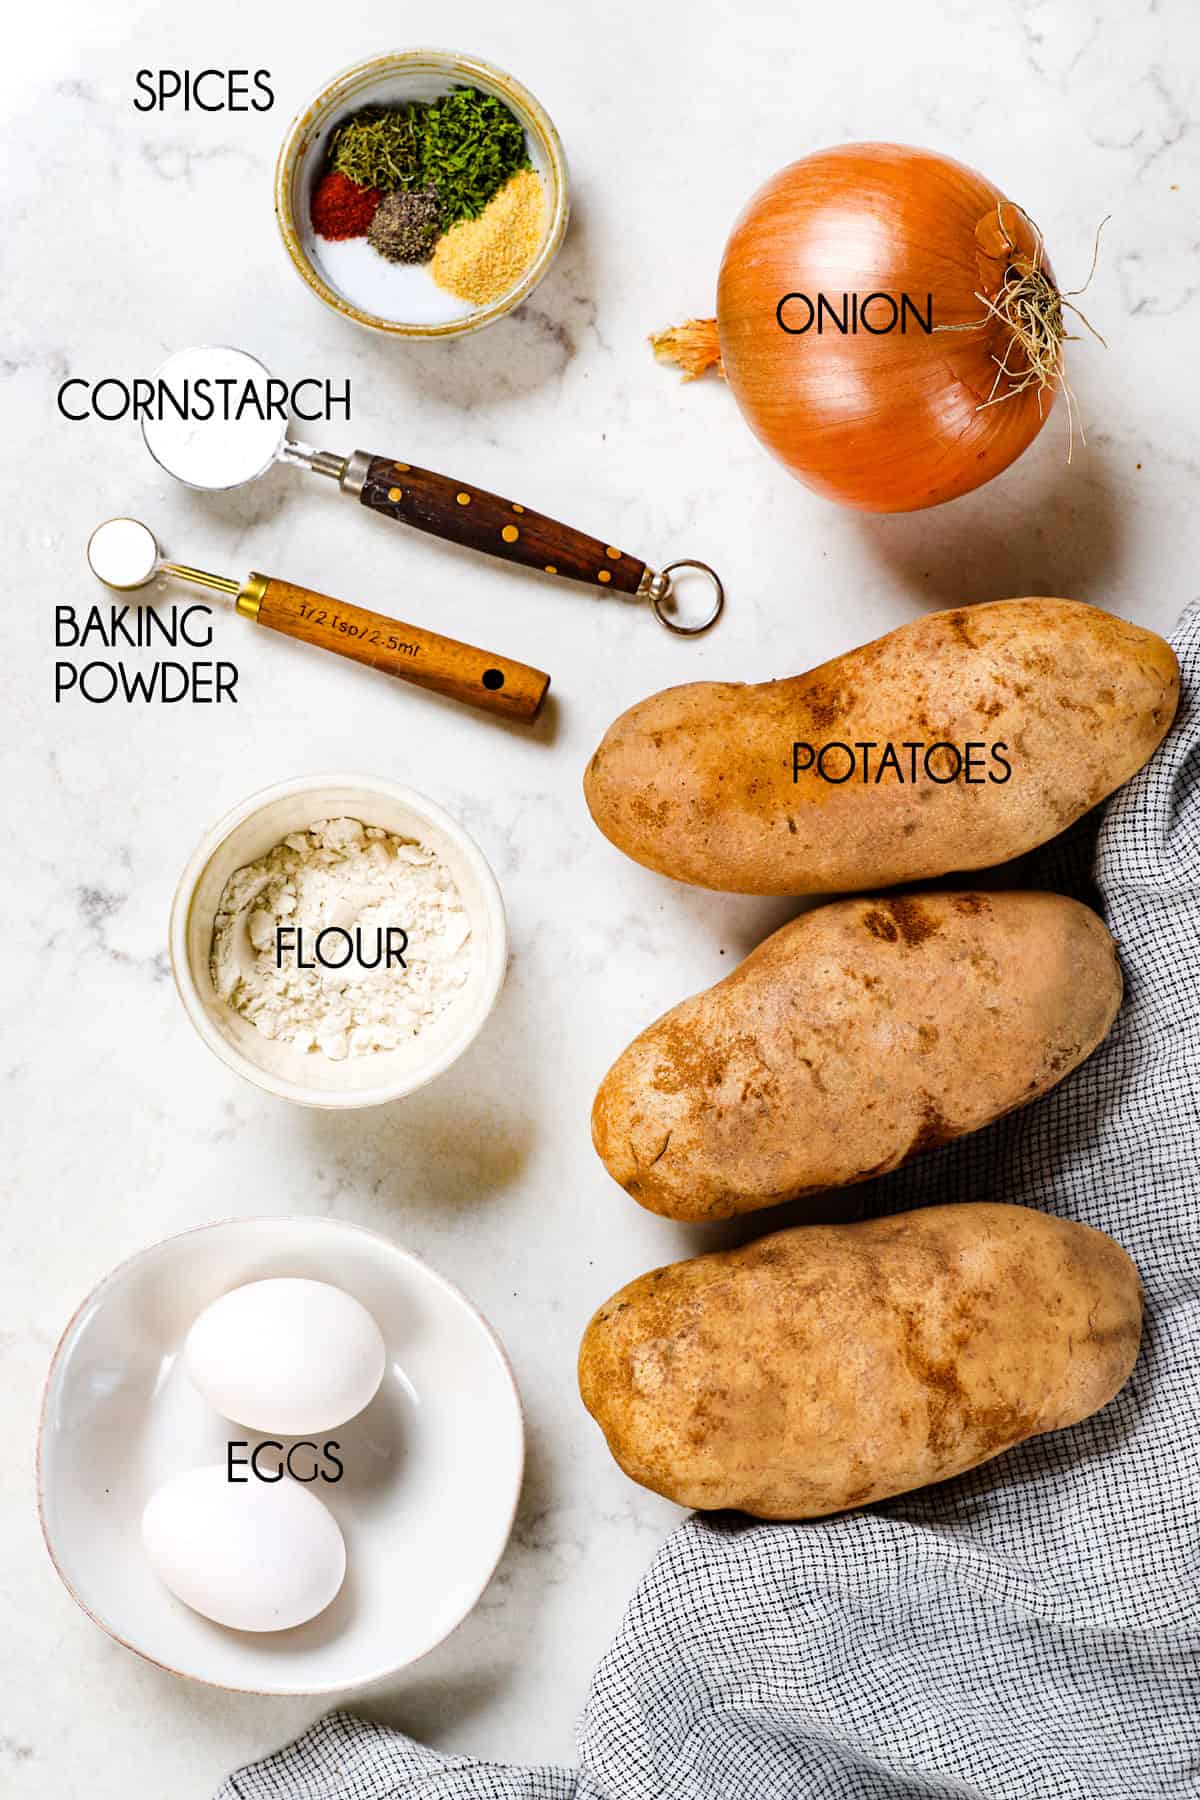 top view showing potato pancake ingredients: potatoes, flour, eggs, onion and spices